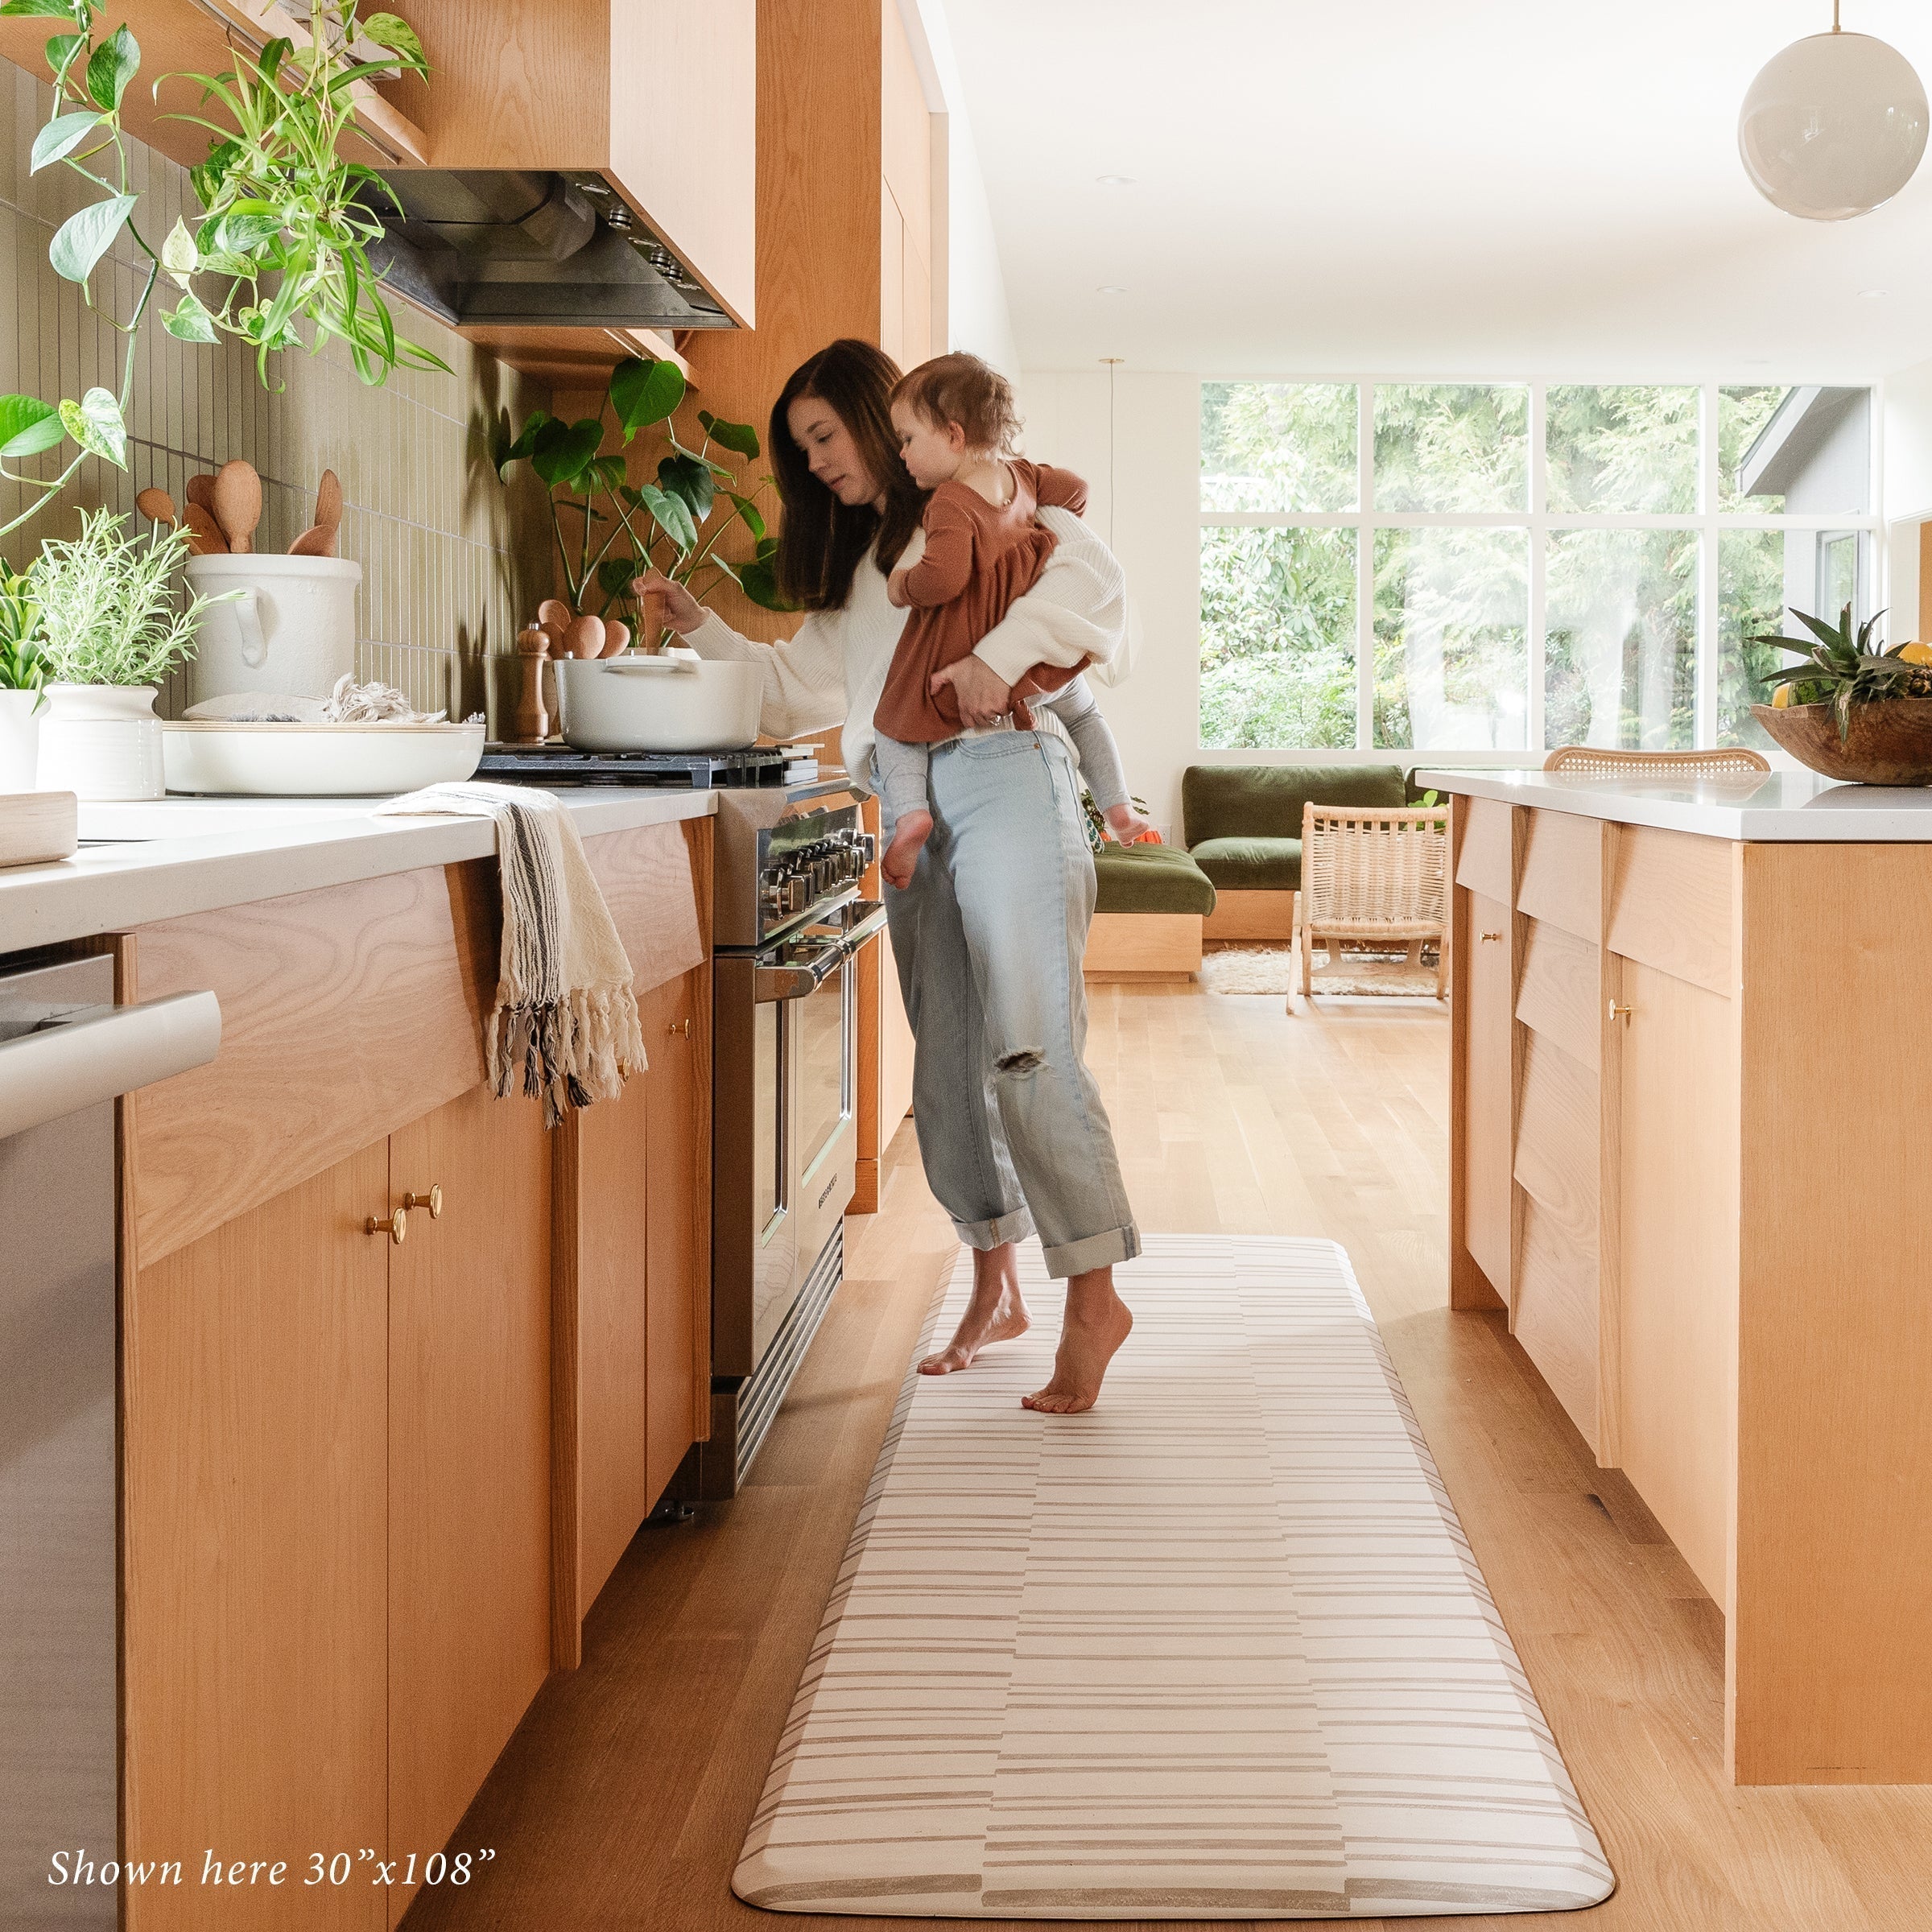 Beige inverted stripe kitchen mat in with Mom holding a baby cooking in kitchen on size 30x108.